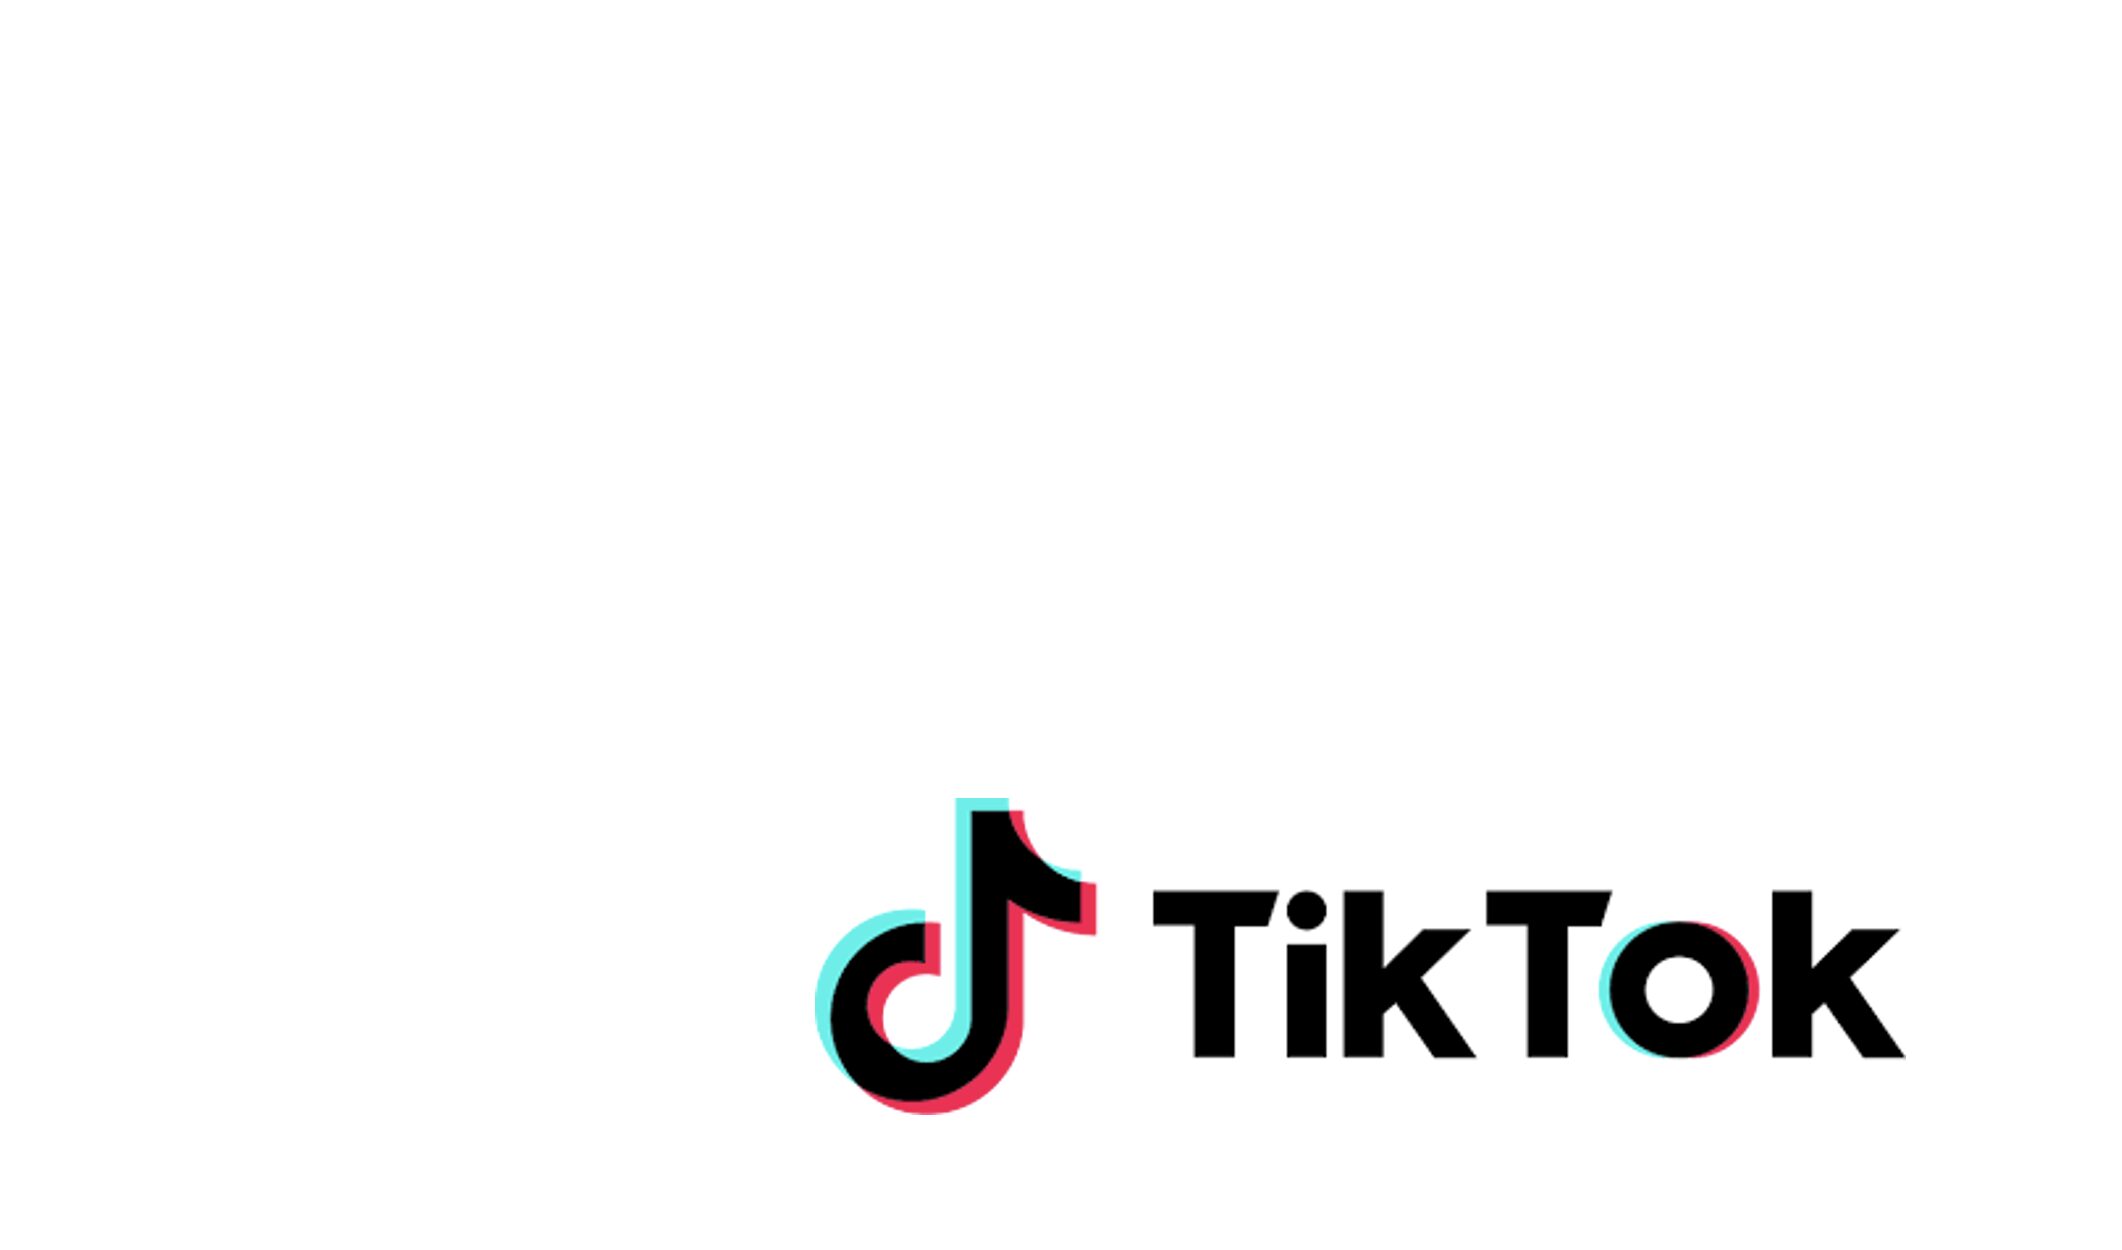 What you should know about TikTok project decorative background